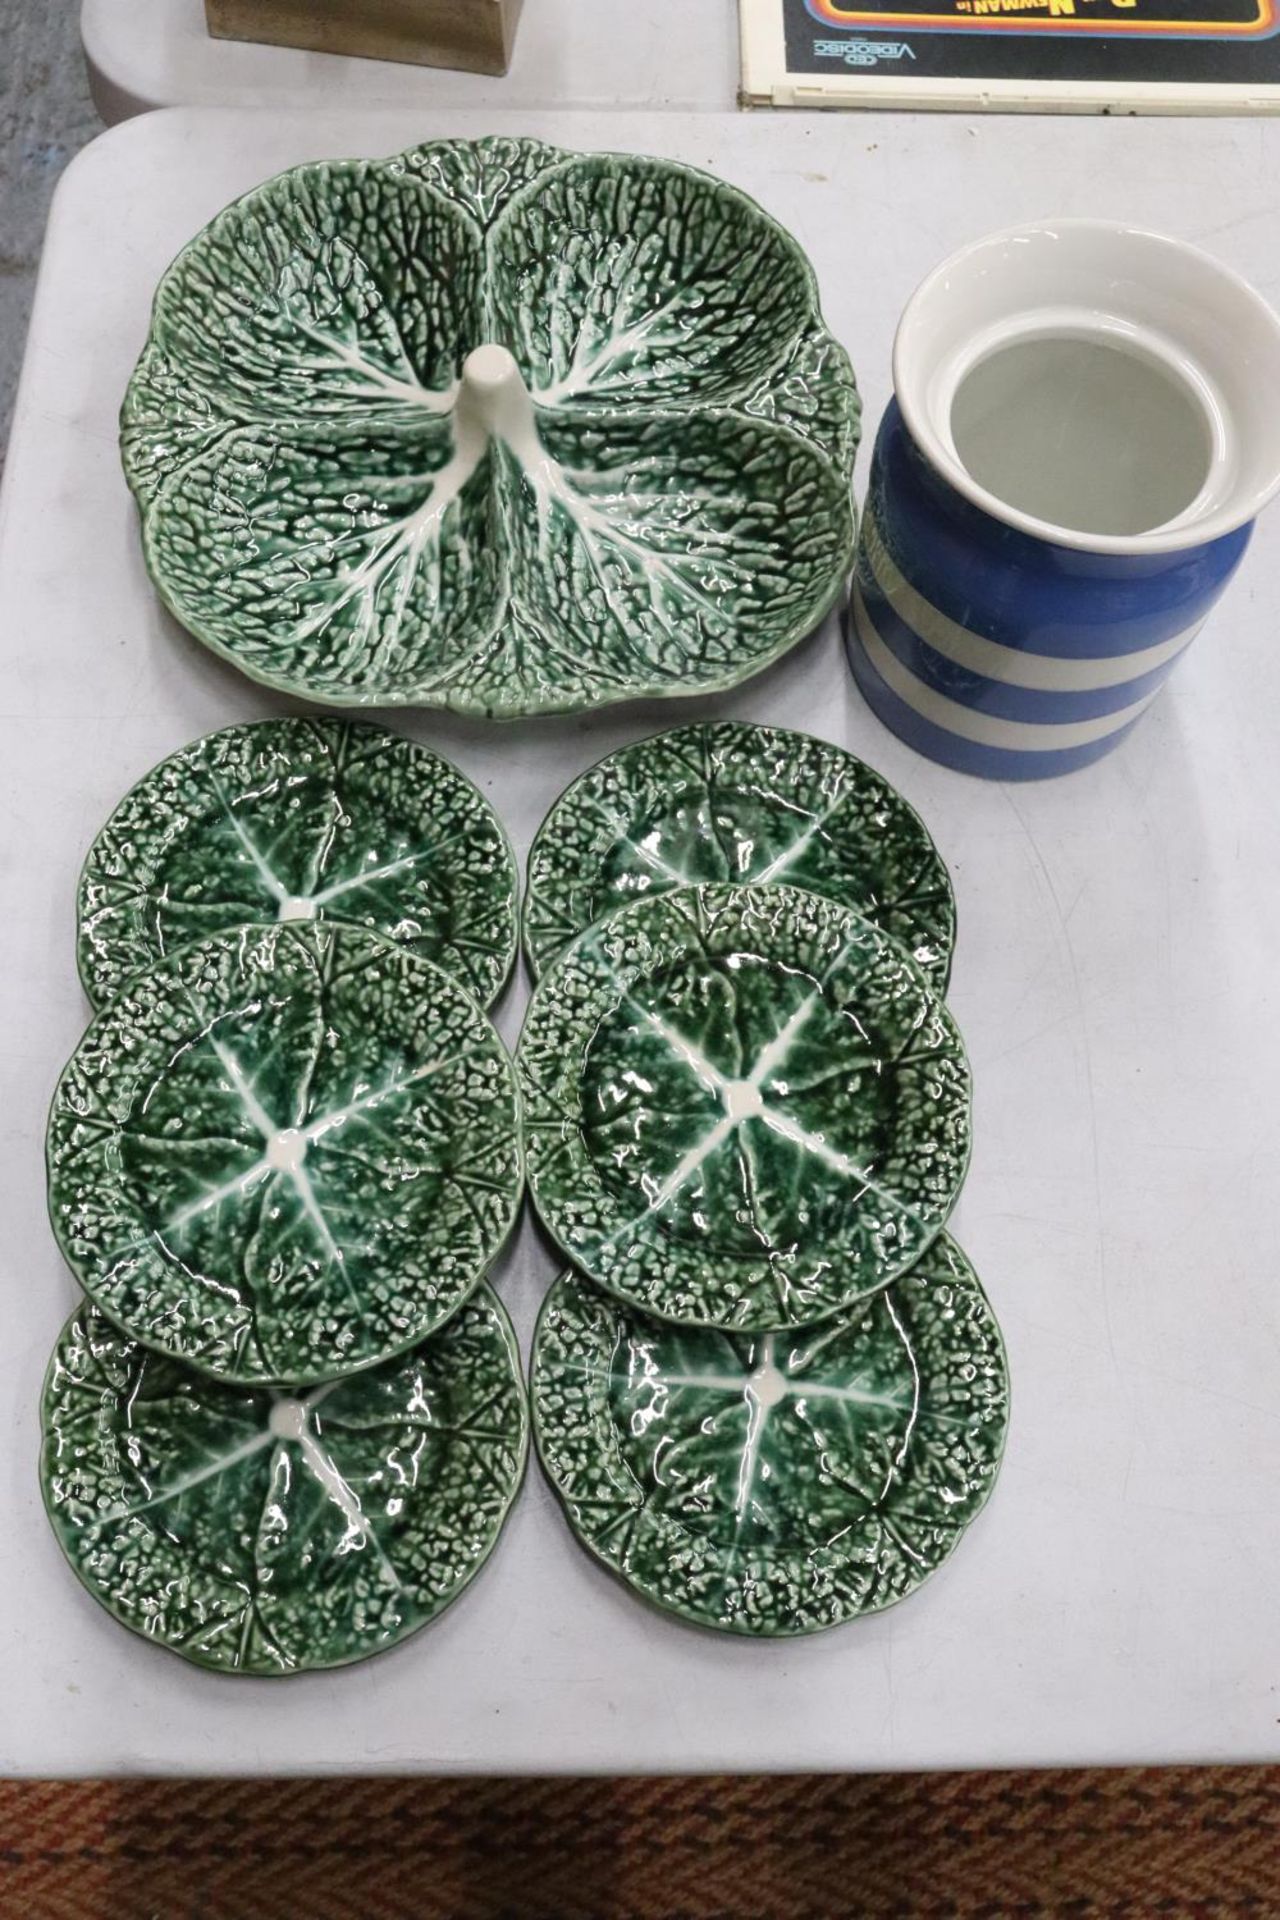 A T G GREEN CORNISH WARE JAR AND A PORTUGUESE SECTIONED HORS D'OEUVRES DISH WITH SIX SIDE PLATES